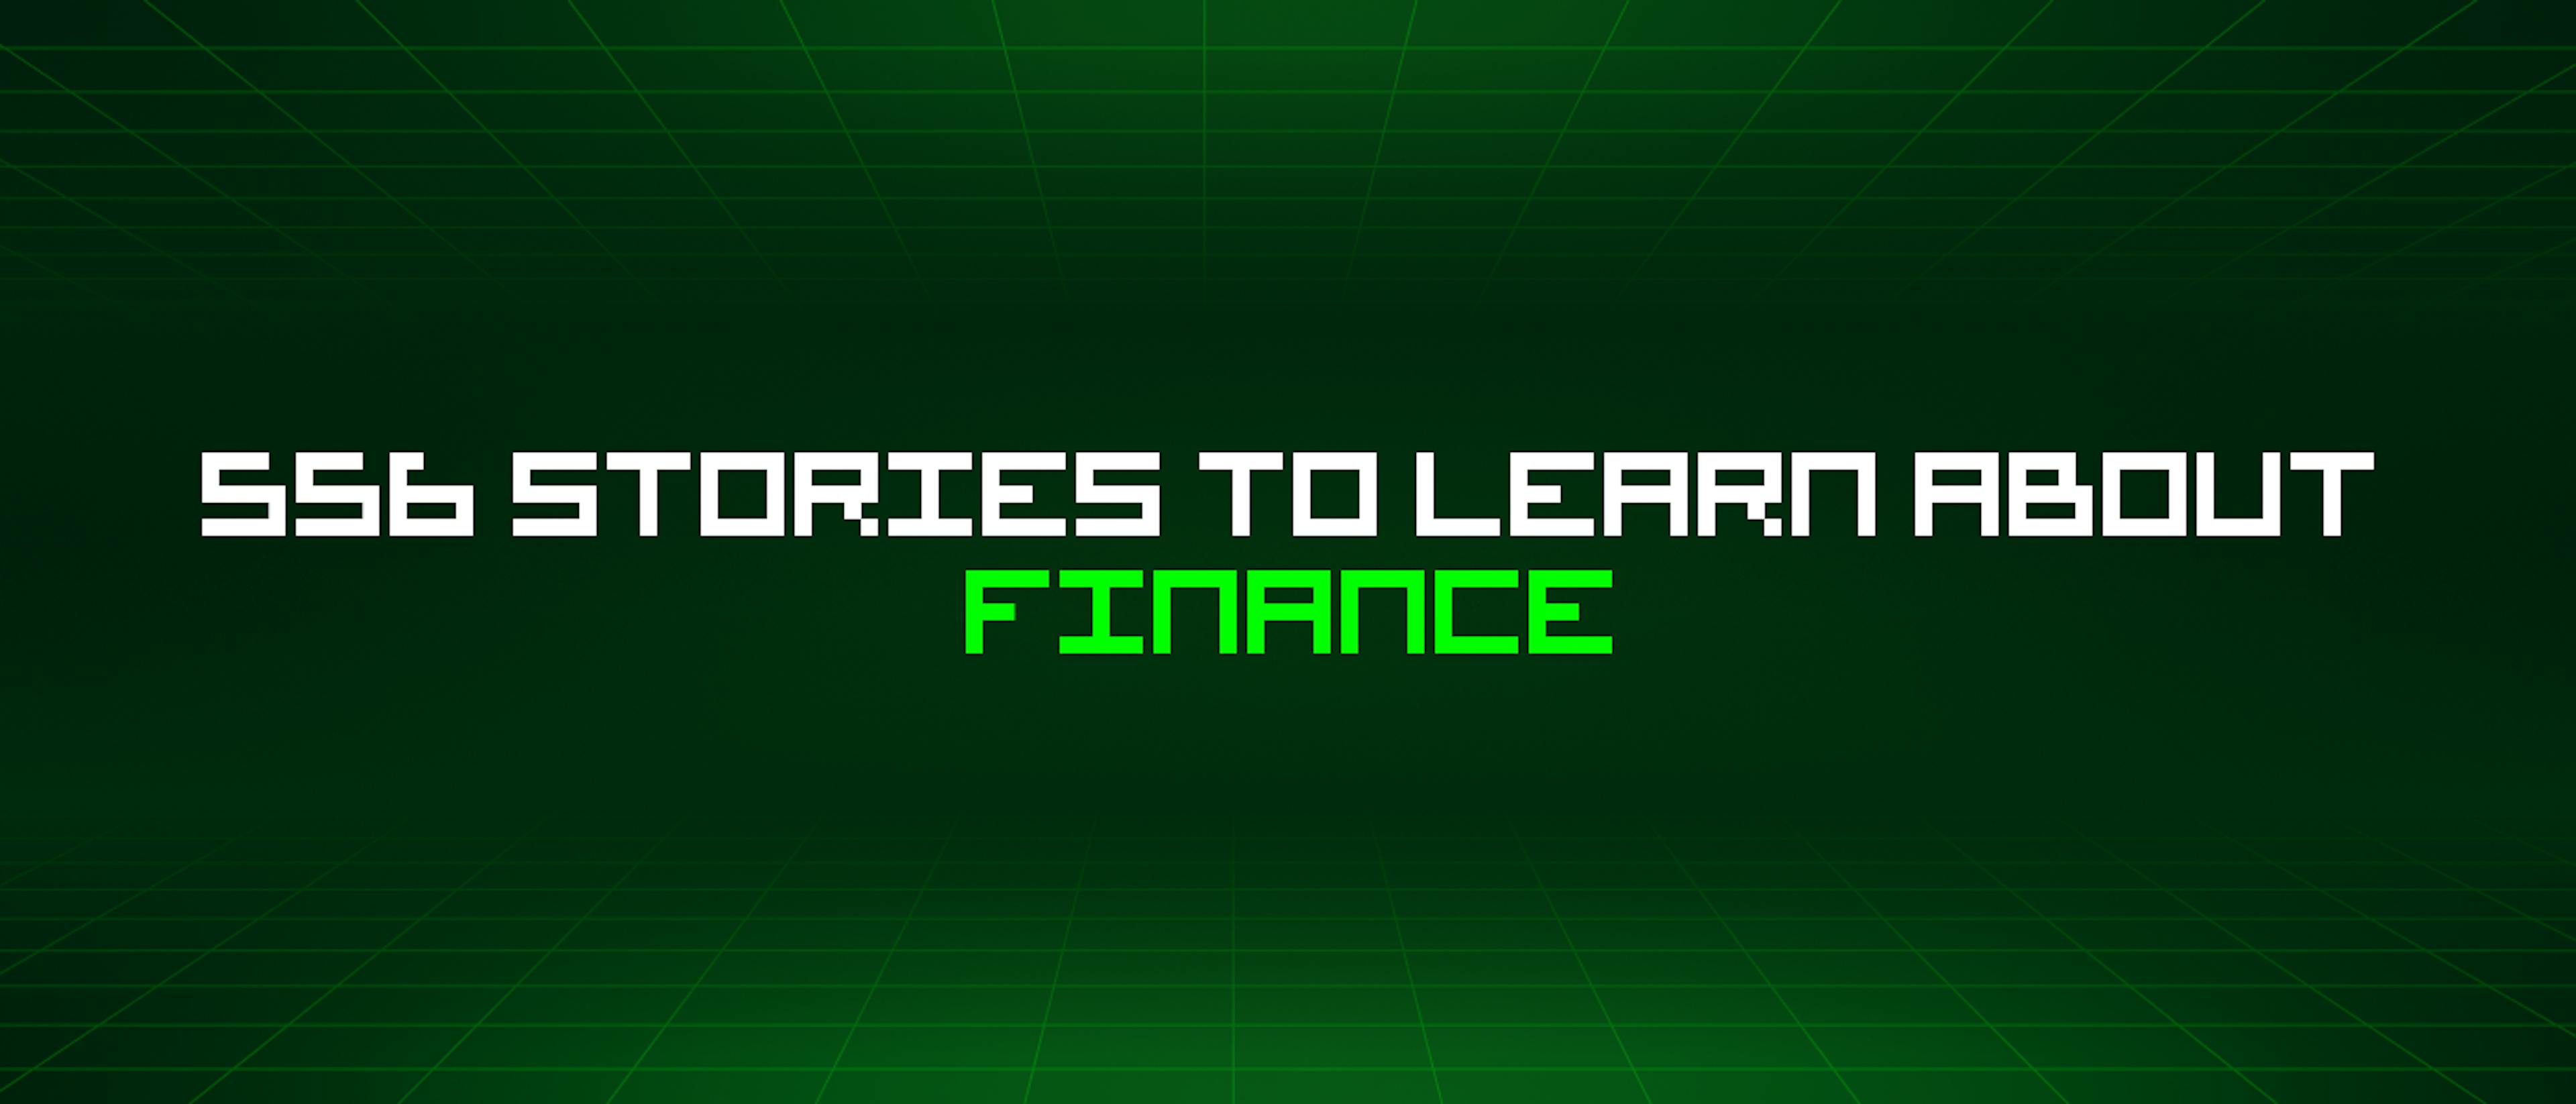 /556-stories-to-learn-about-finance feature image